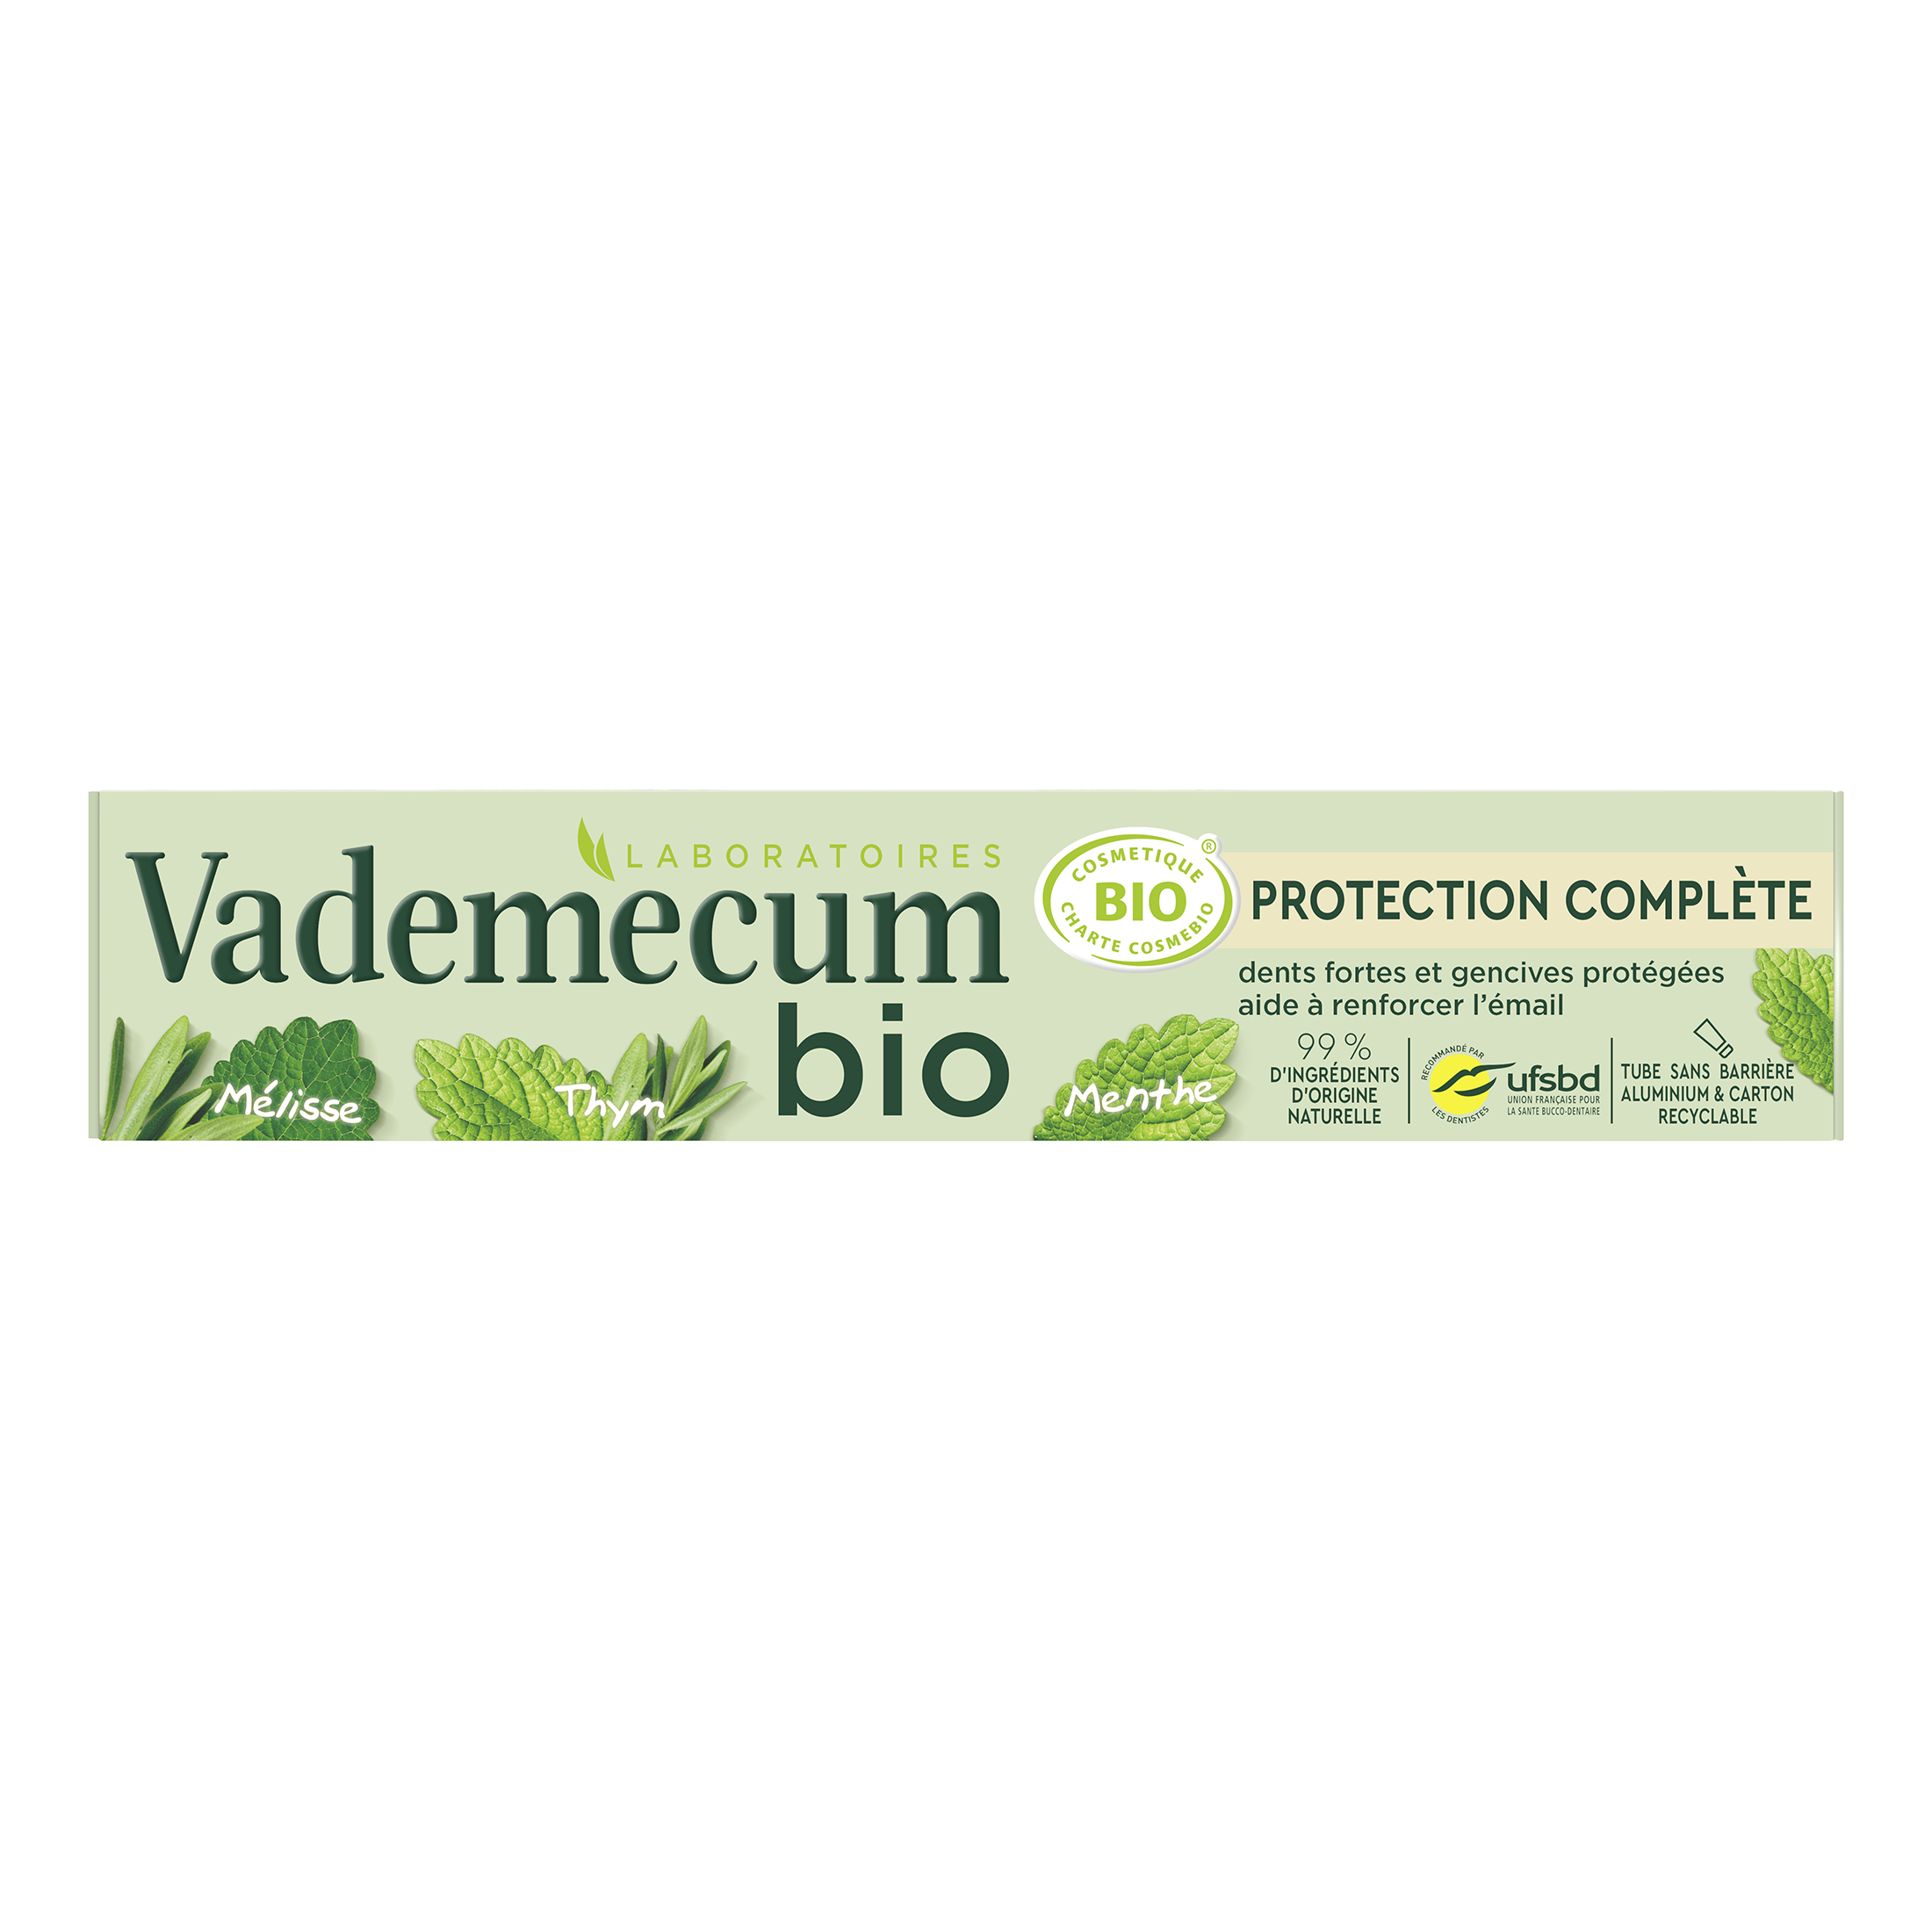 3178040661950_VAD_TP_Bio_CompleteProtection_75_front